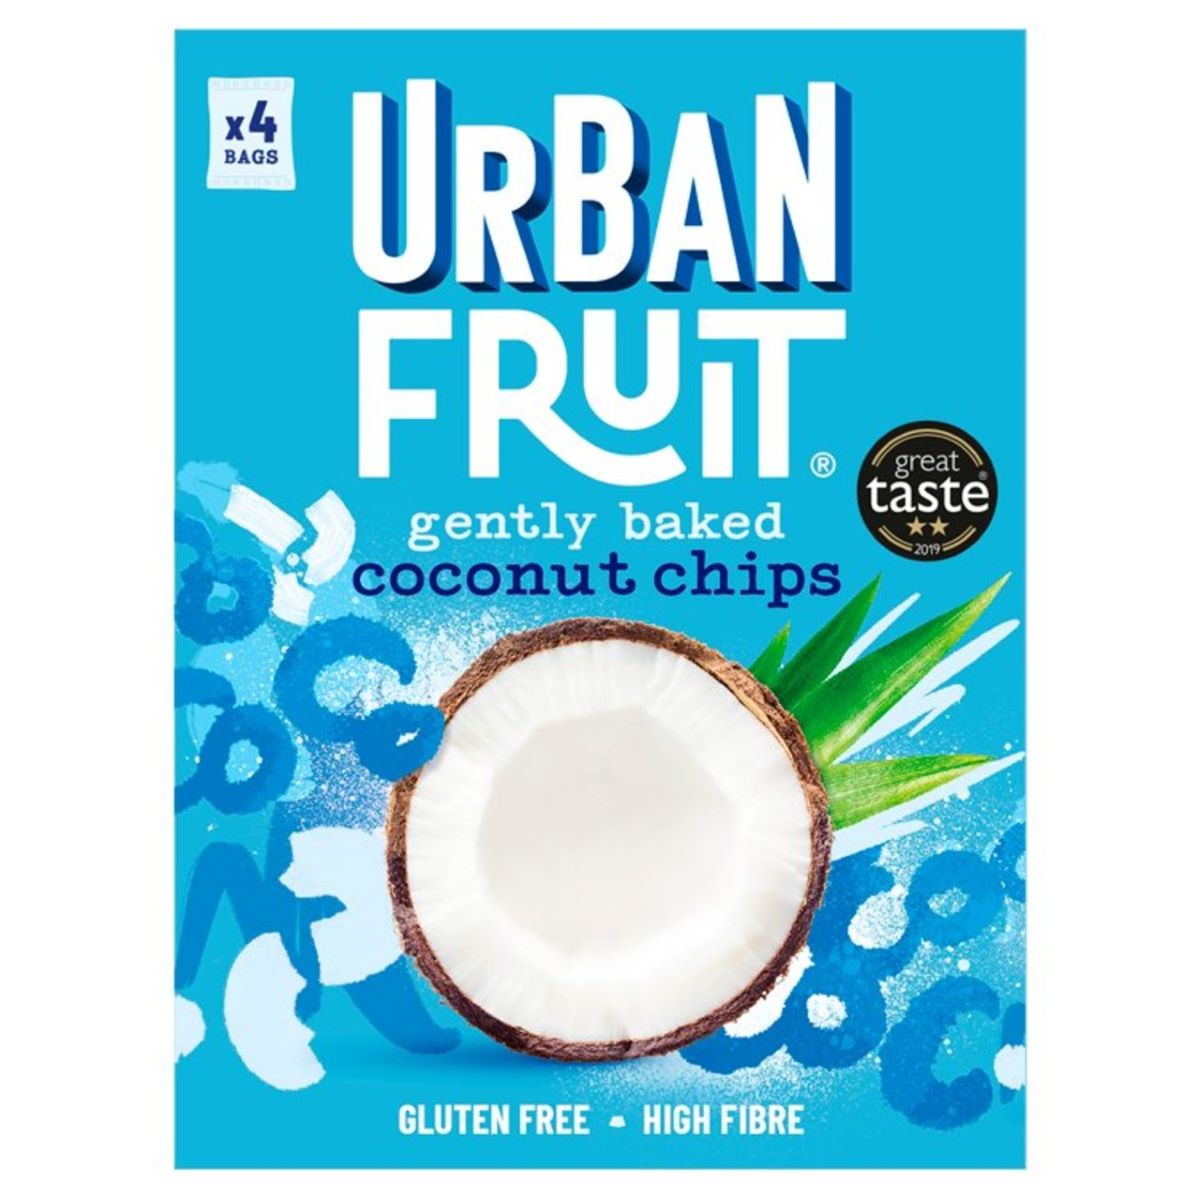 Urban Fruit gently baked coconut chips